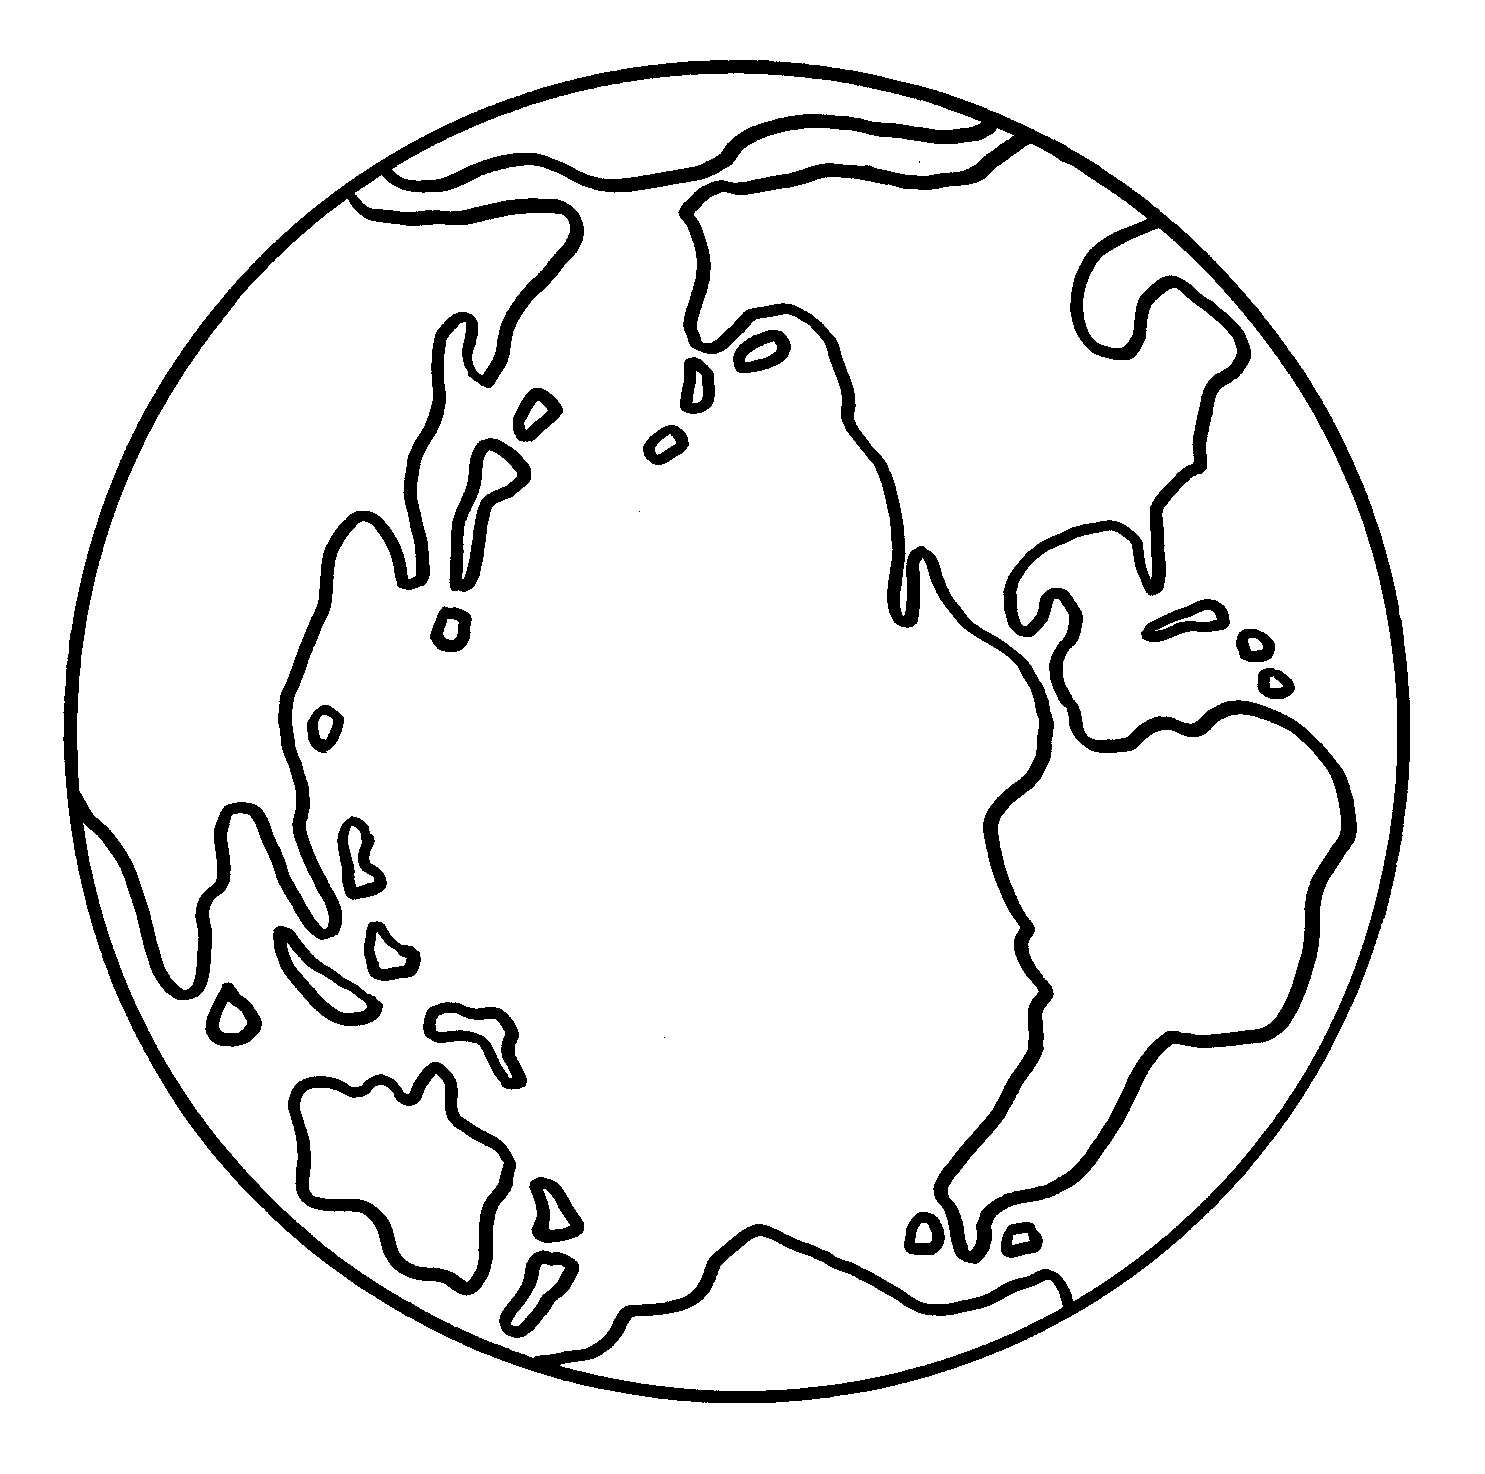 Coloring Page - Earth - ClipArt Best - ClipArt Best